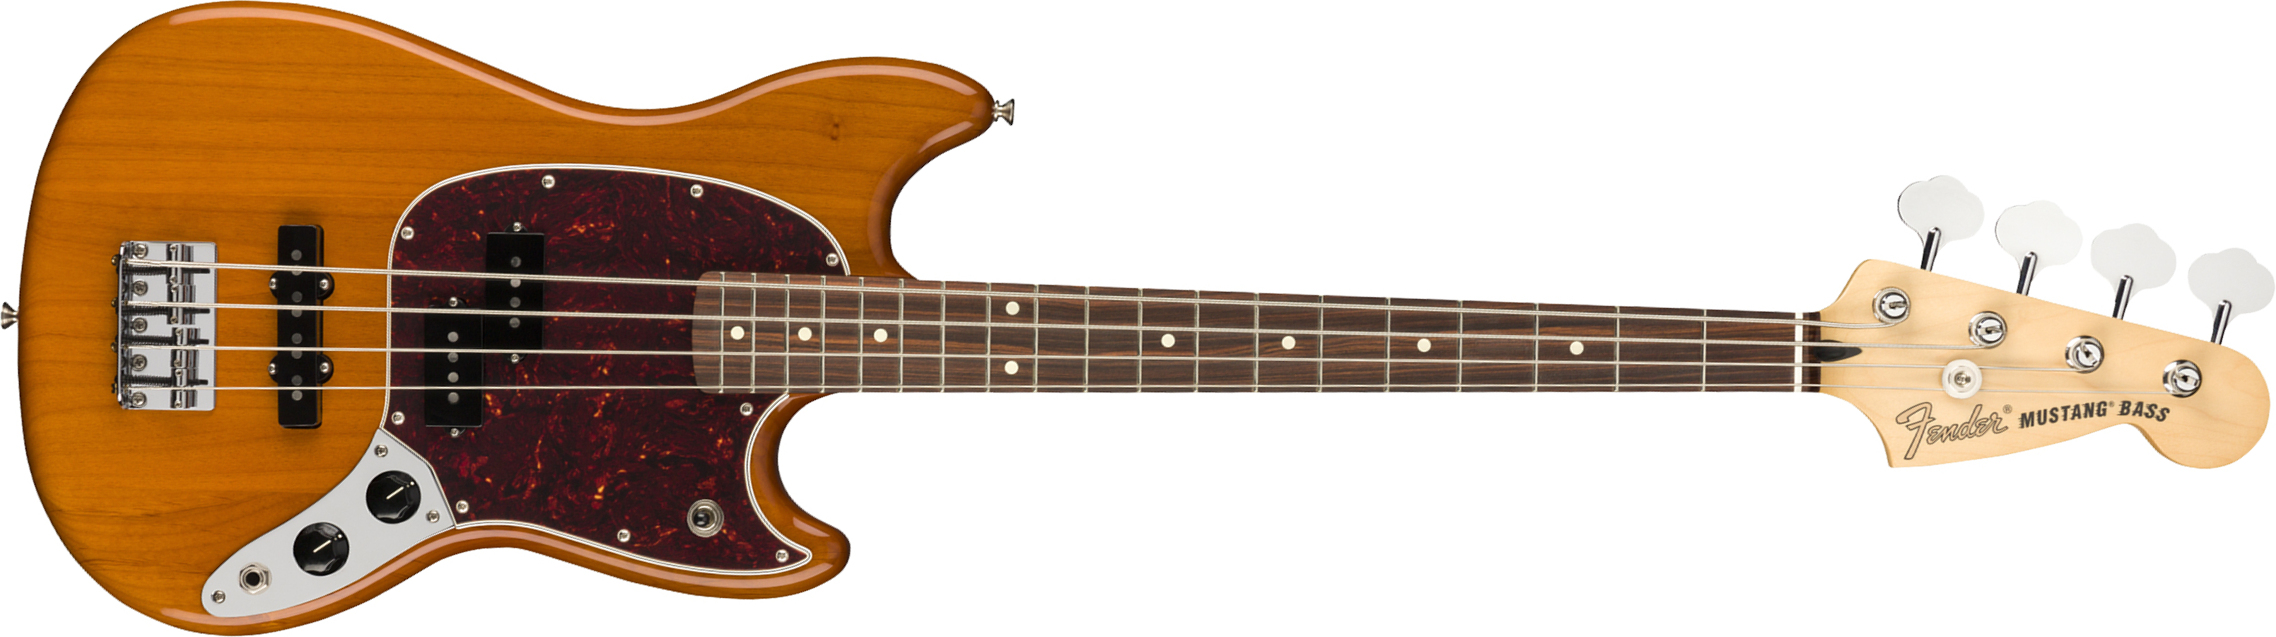 Fender Player Mustang Bass Pj Mex Pf - Aged Natural - Bajo eléctrico para niños - Main picture